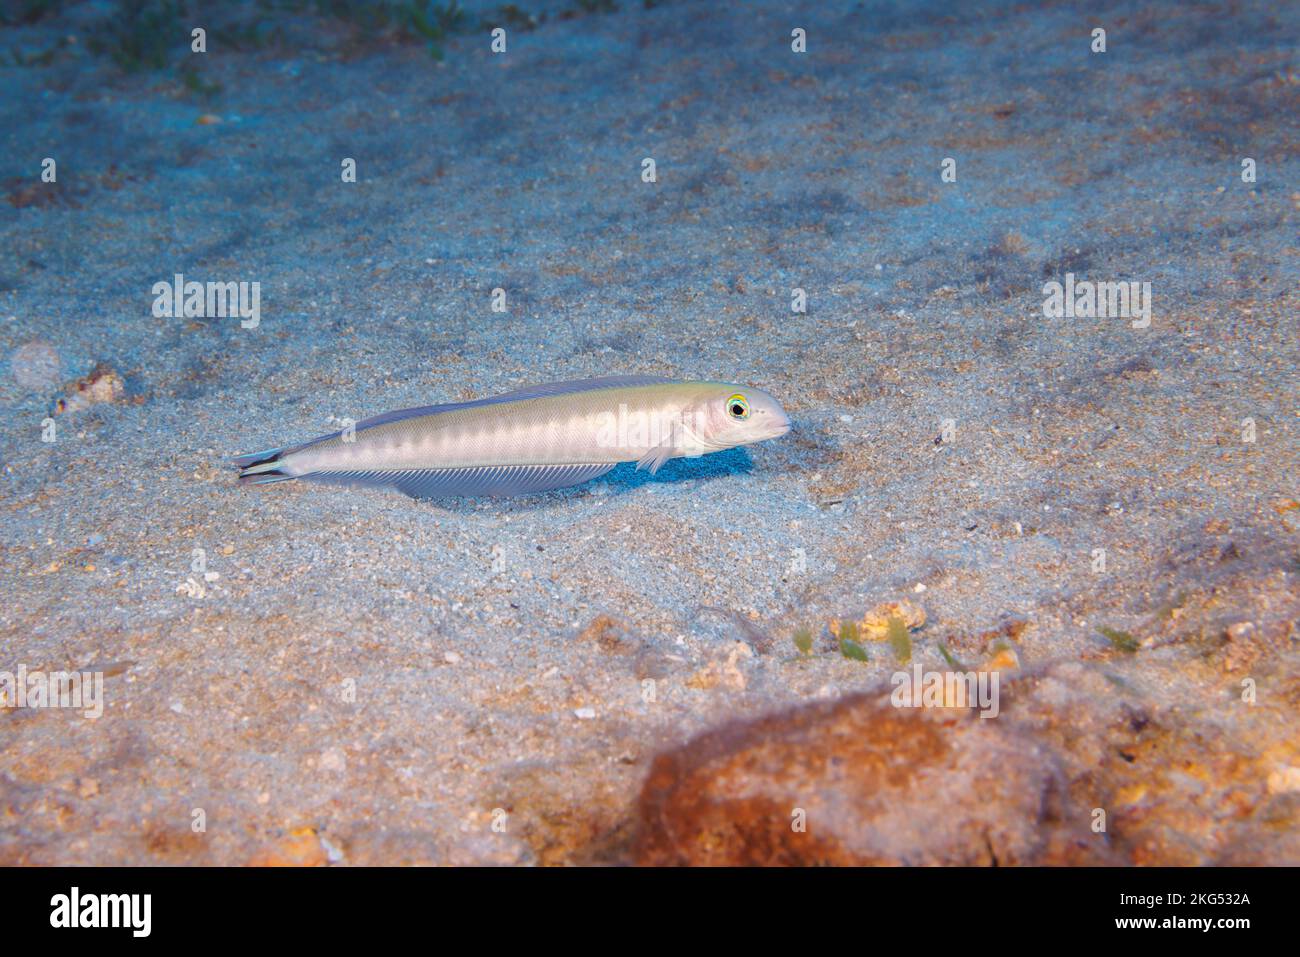 The flagtail tilefish, Malacanthus brevirostris, or quakerfish, inhabits barren areas of outer reef slopes. They occur in pairs over rocks or sandy ar Stock Photo